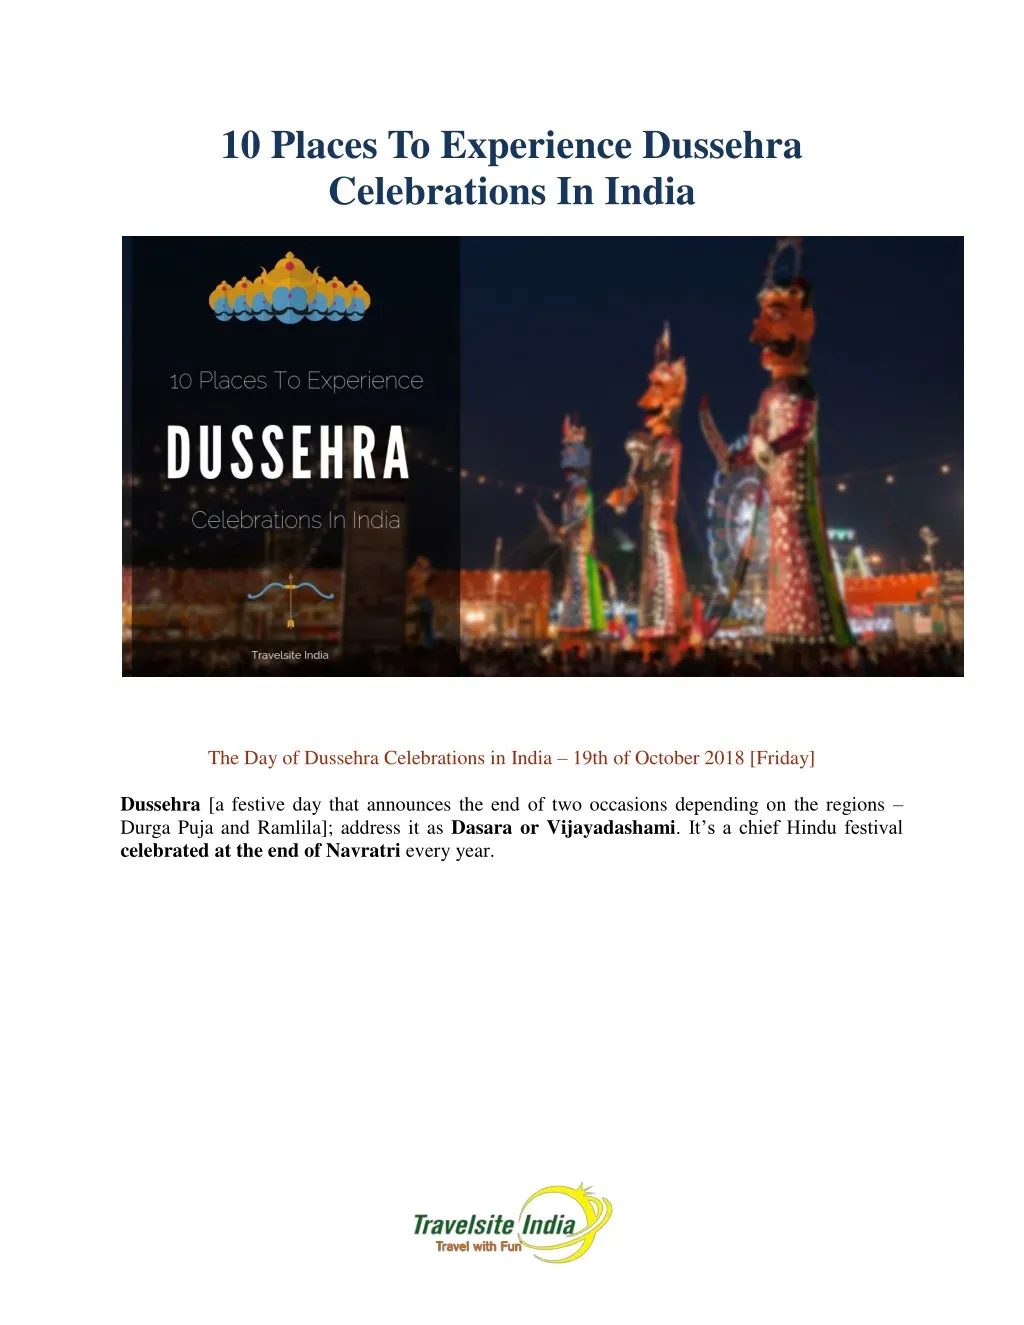 10 places to experience dussehra celebrations